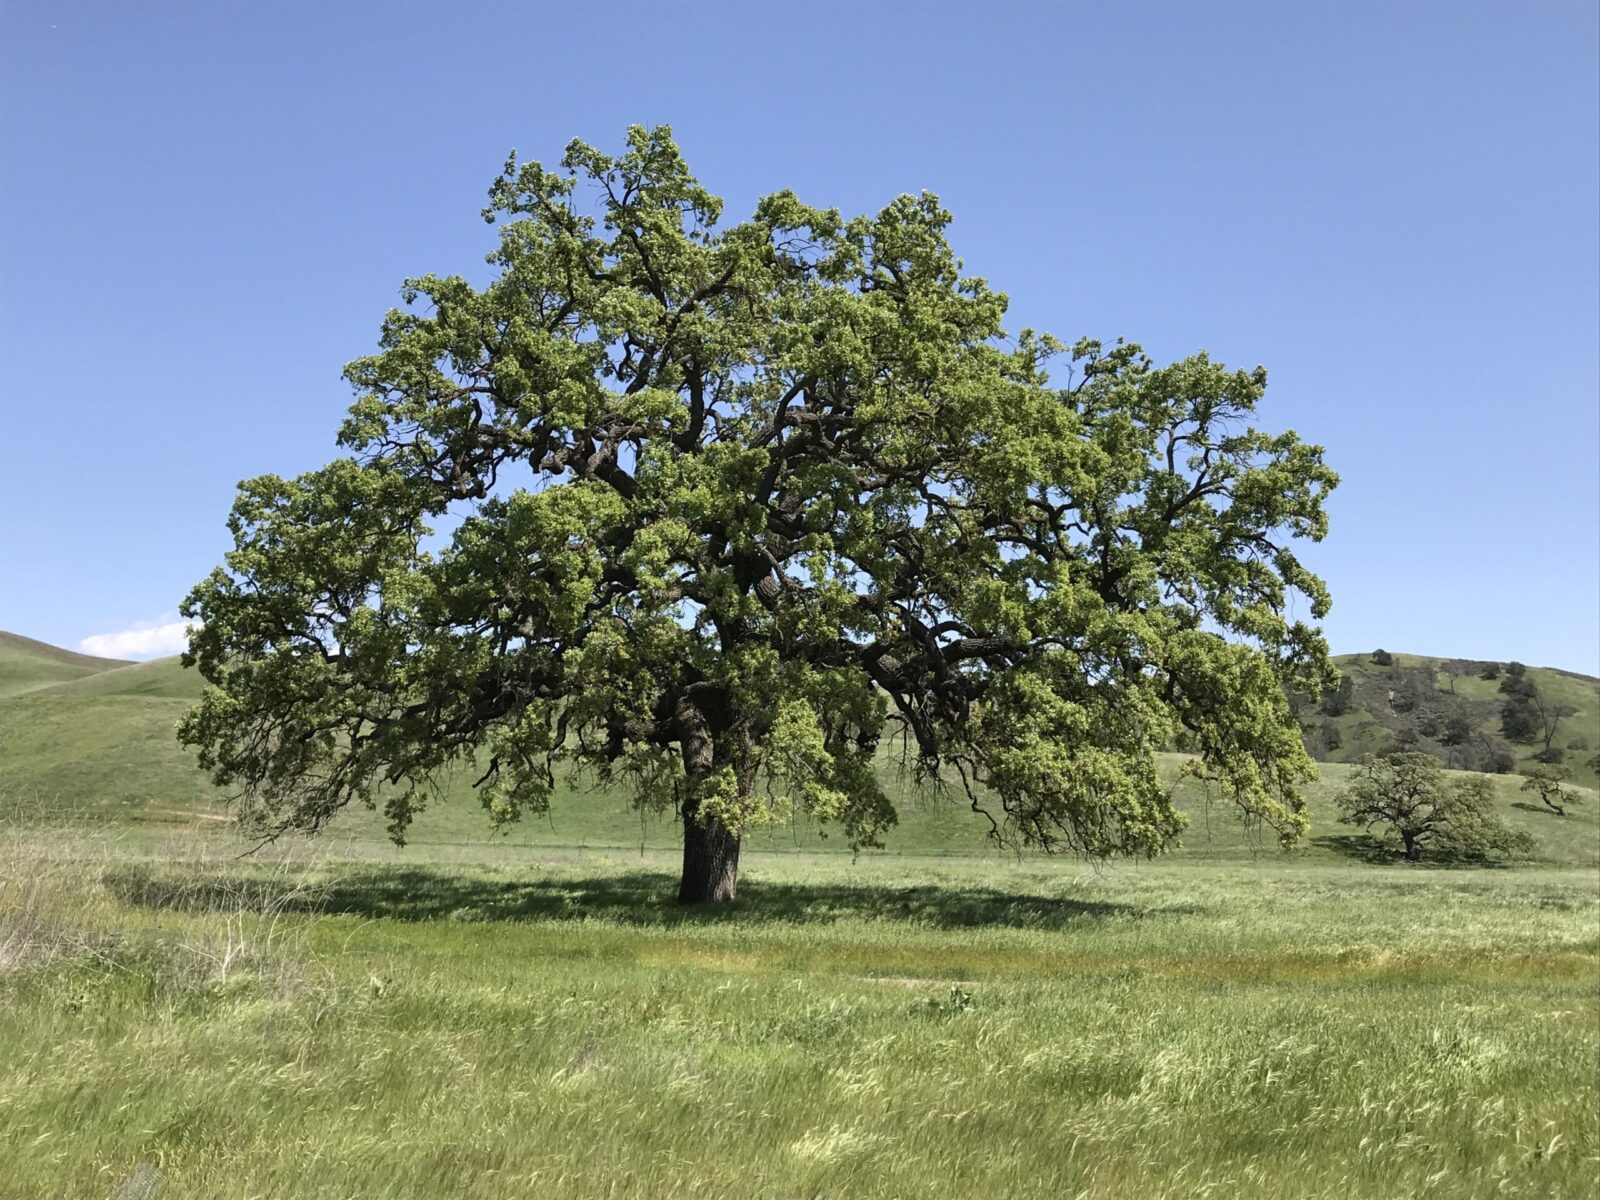 One of California’s iconic tree species offers lessons for conservation